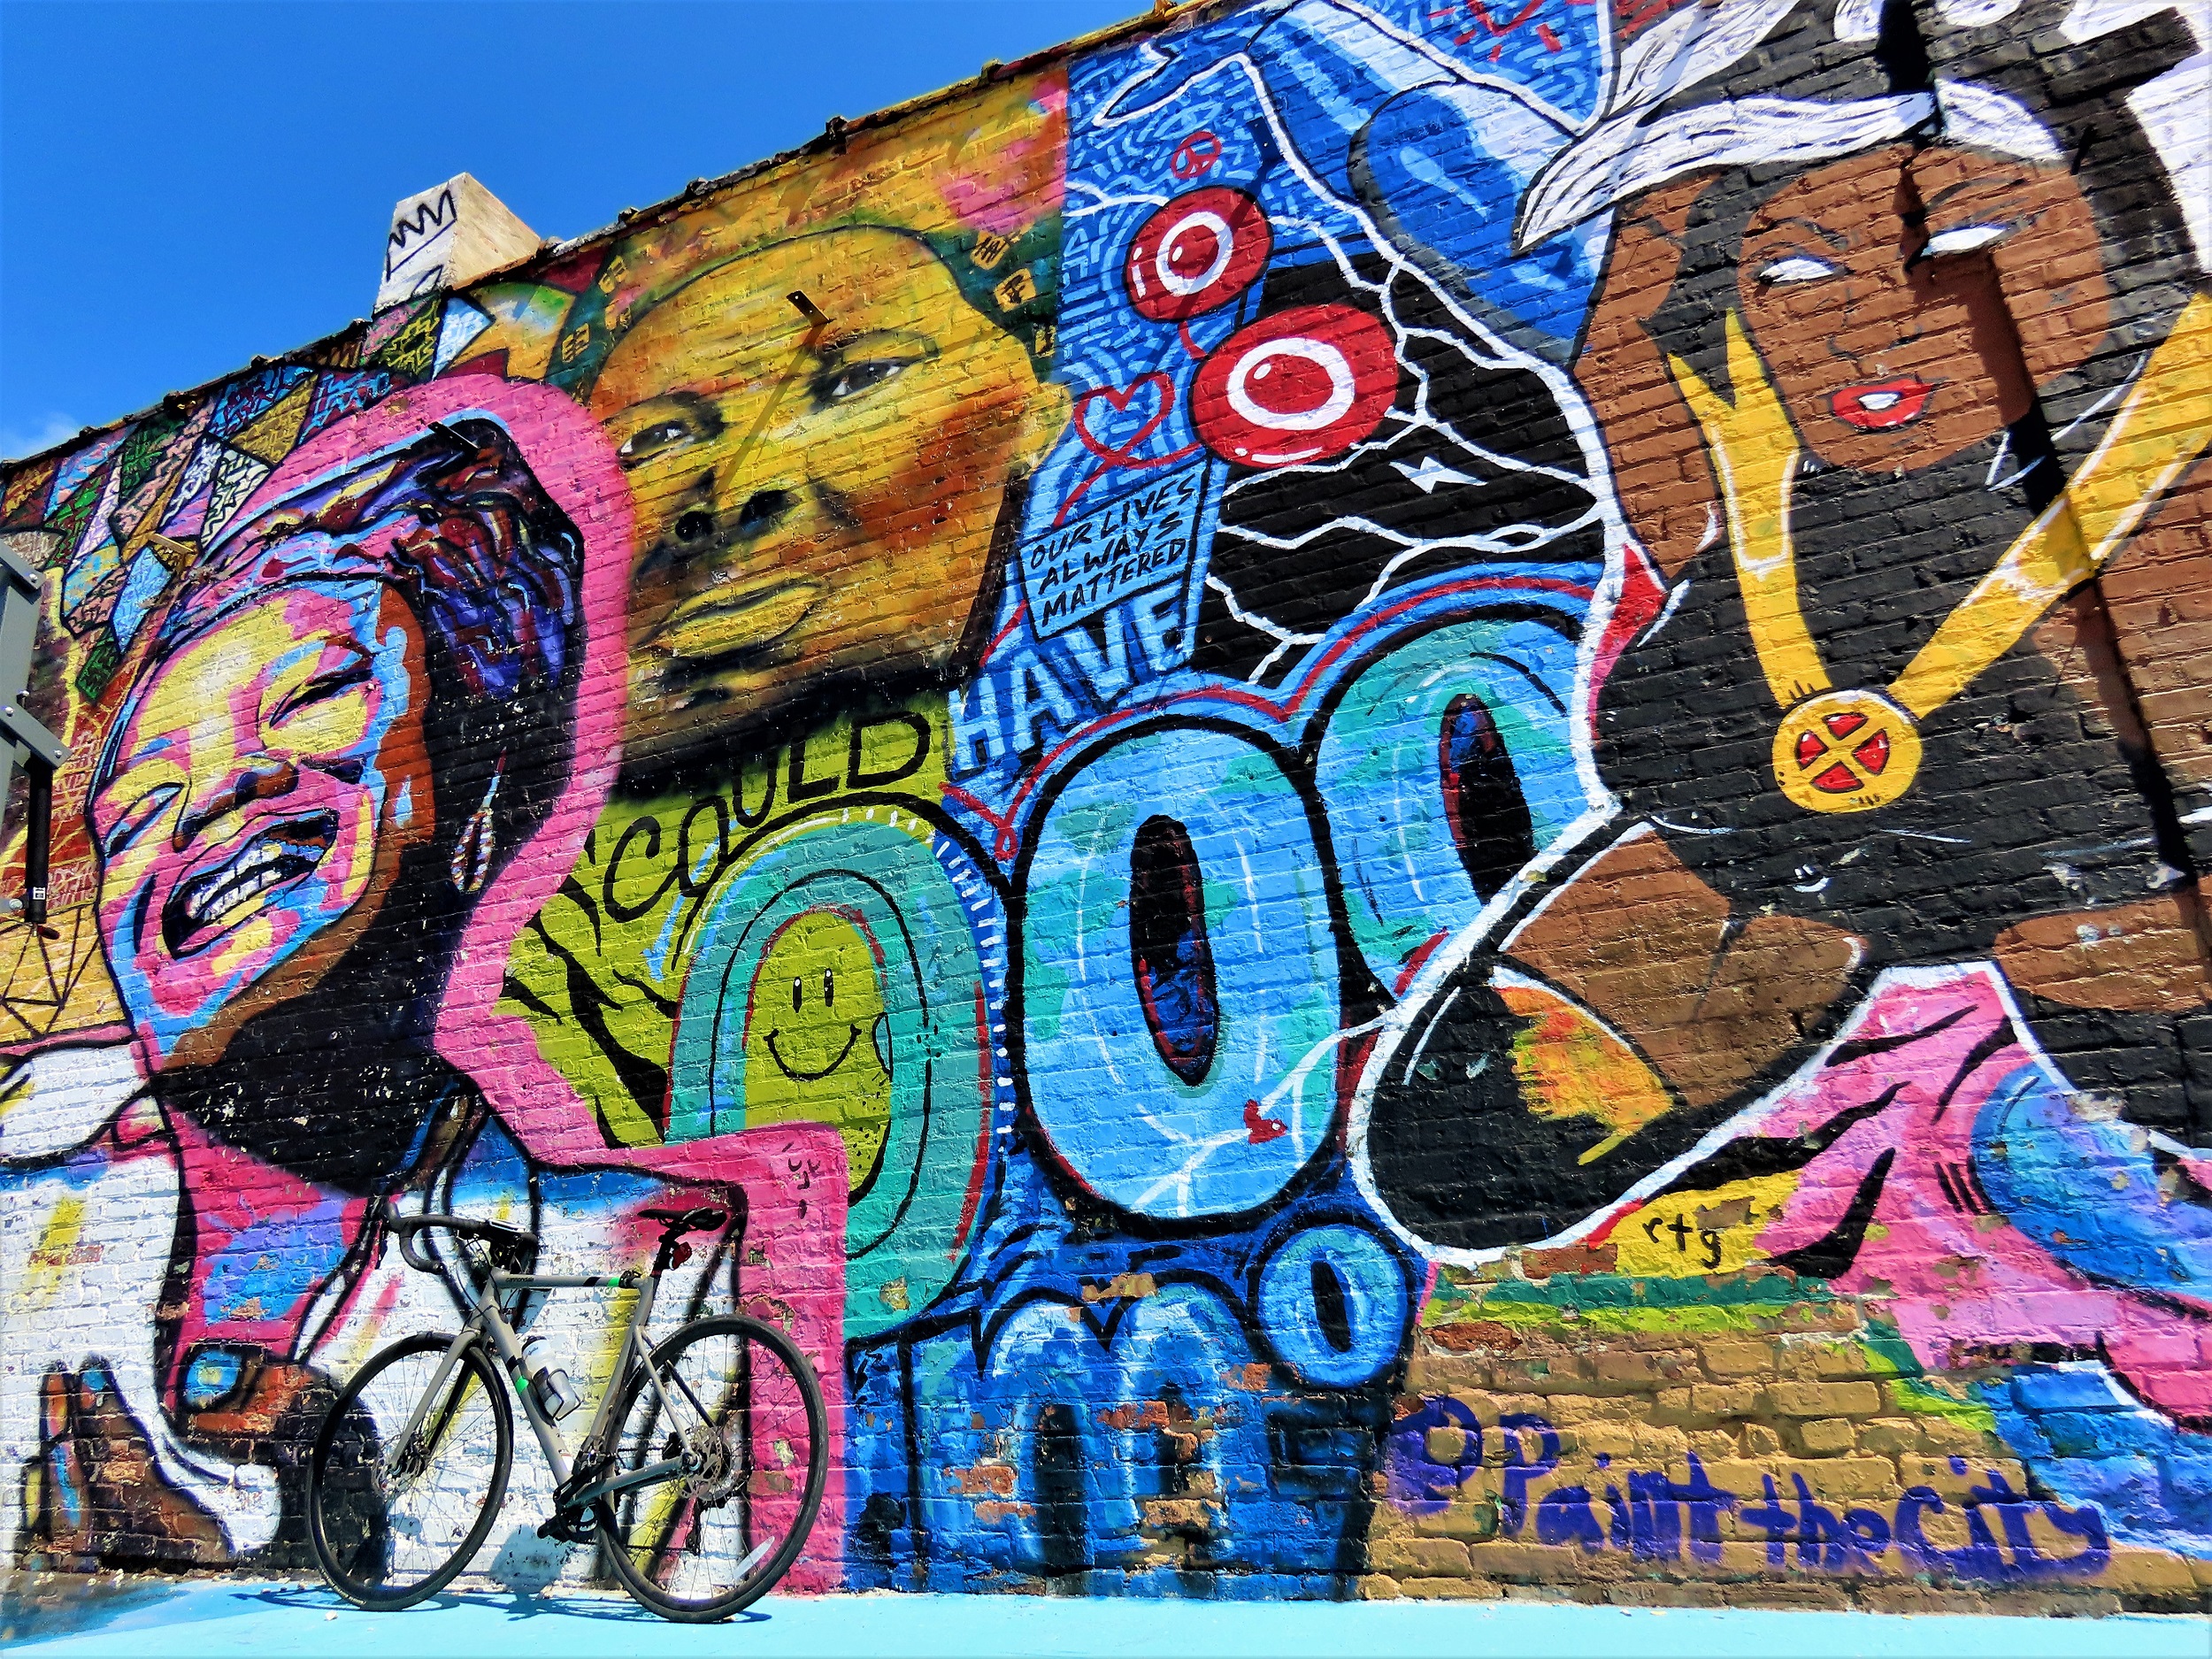 a tour bike leaning on a mural depicting Black female icons real (Harriet Tubman) and fictional (Storm from the X-Men)